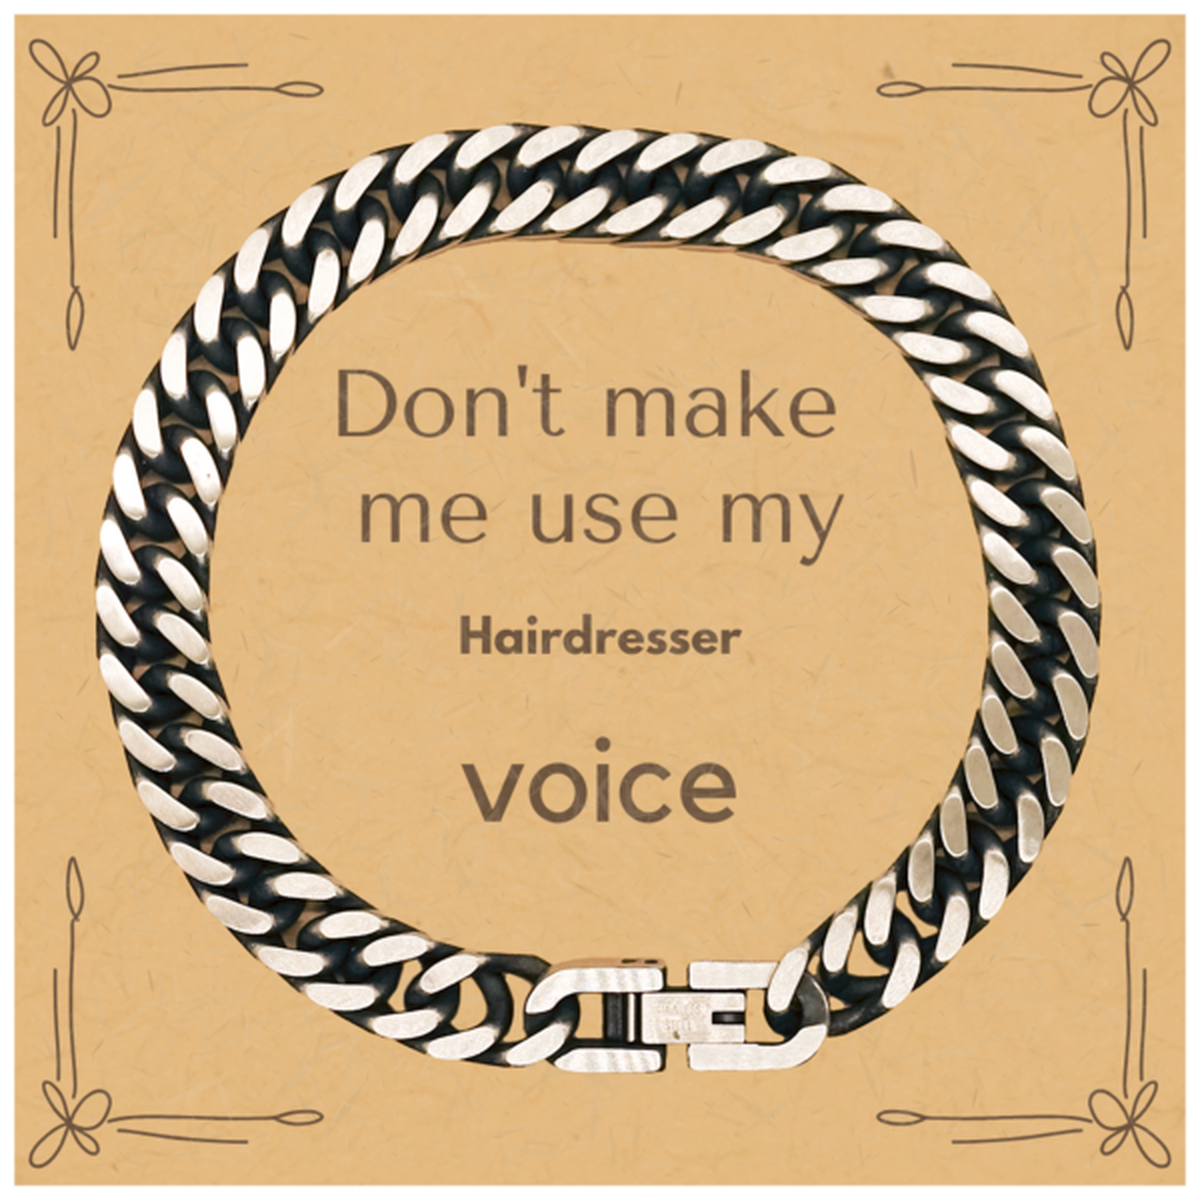 Don't make me use my Hairdresser voice, Sarcasm Hairdresser Card Gifts, Christmas Hairdresser Cuban Link Chain Bracelet Birthday Unique Gifts For Hairdresser Coworkers, Men, Women, Colleague, Friends